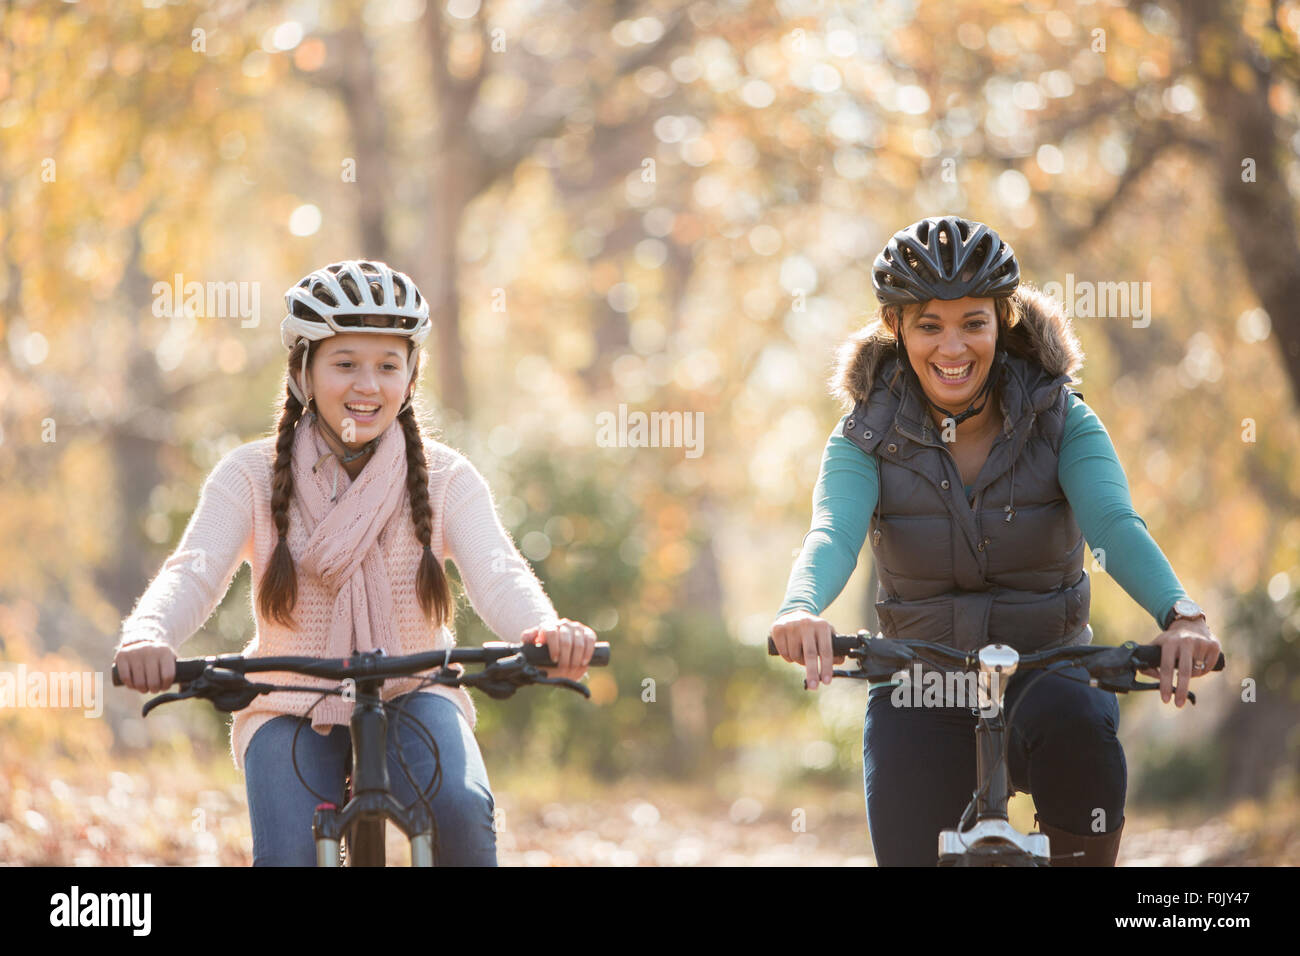 Smiling mother and daughter bike riding outdoors Stock Photo